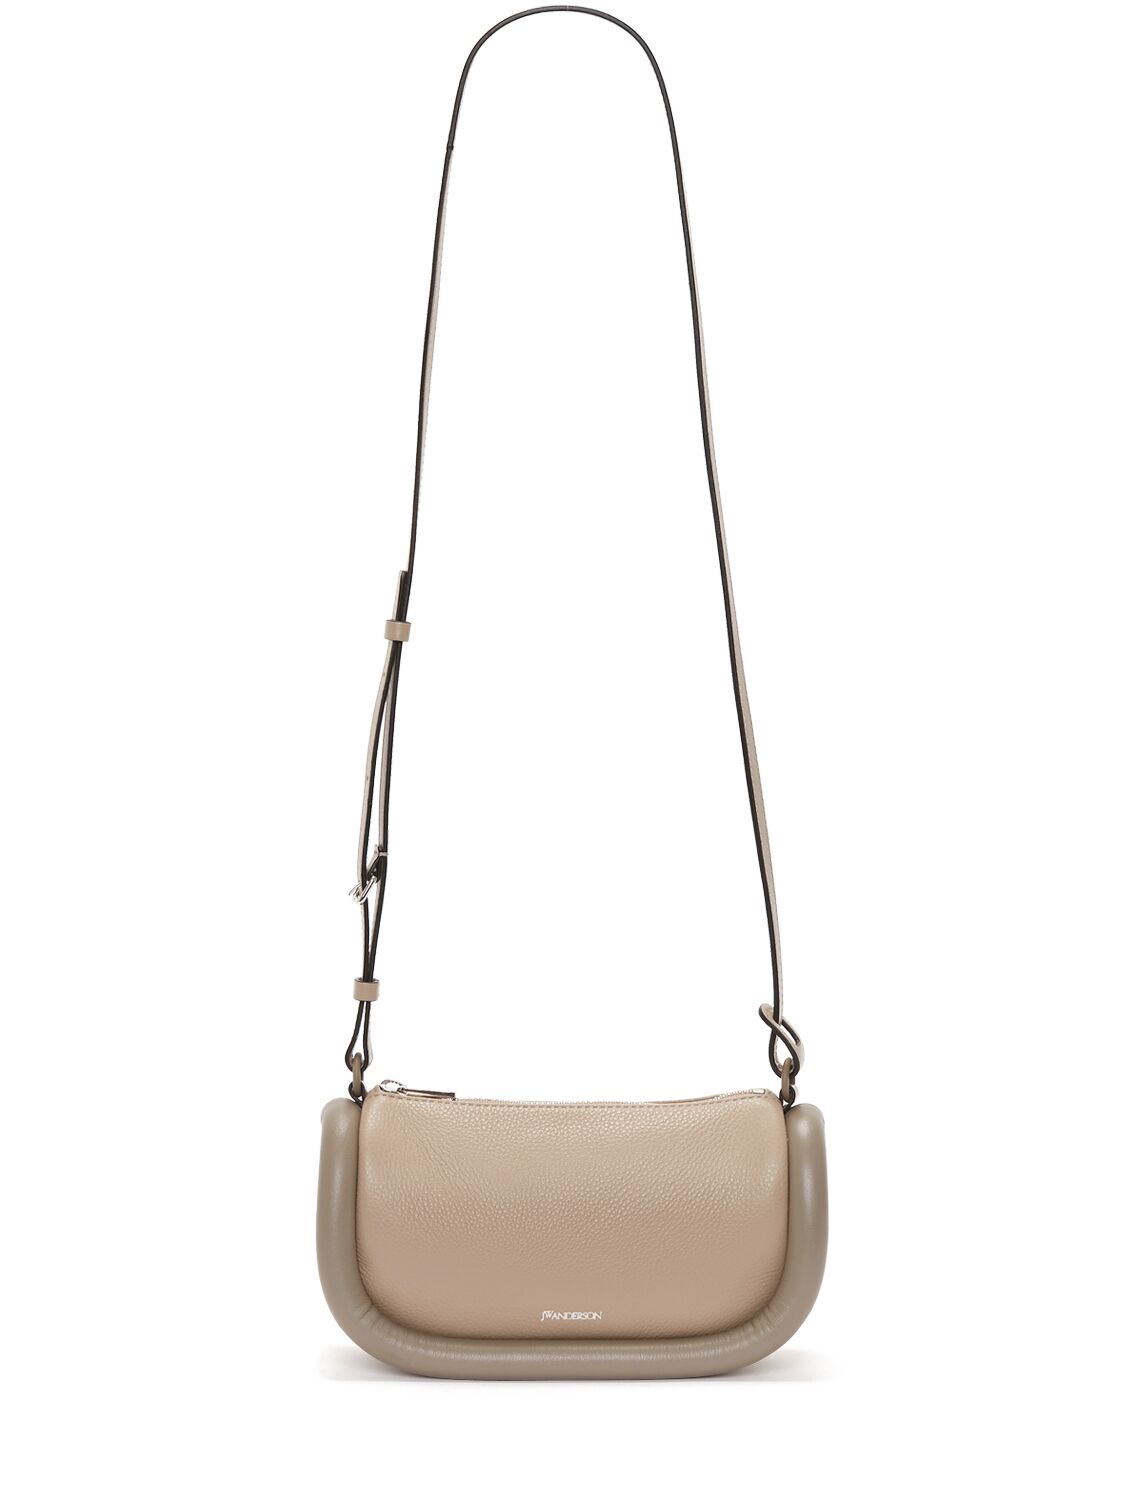 Jw Anderson The Bumper-12 Leather Shoulder Bag In Taupe